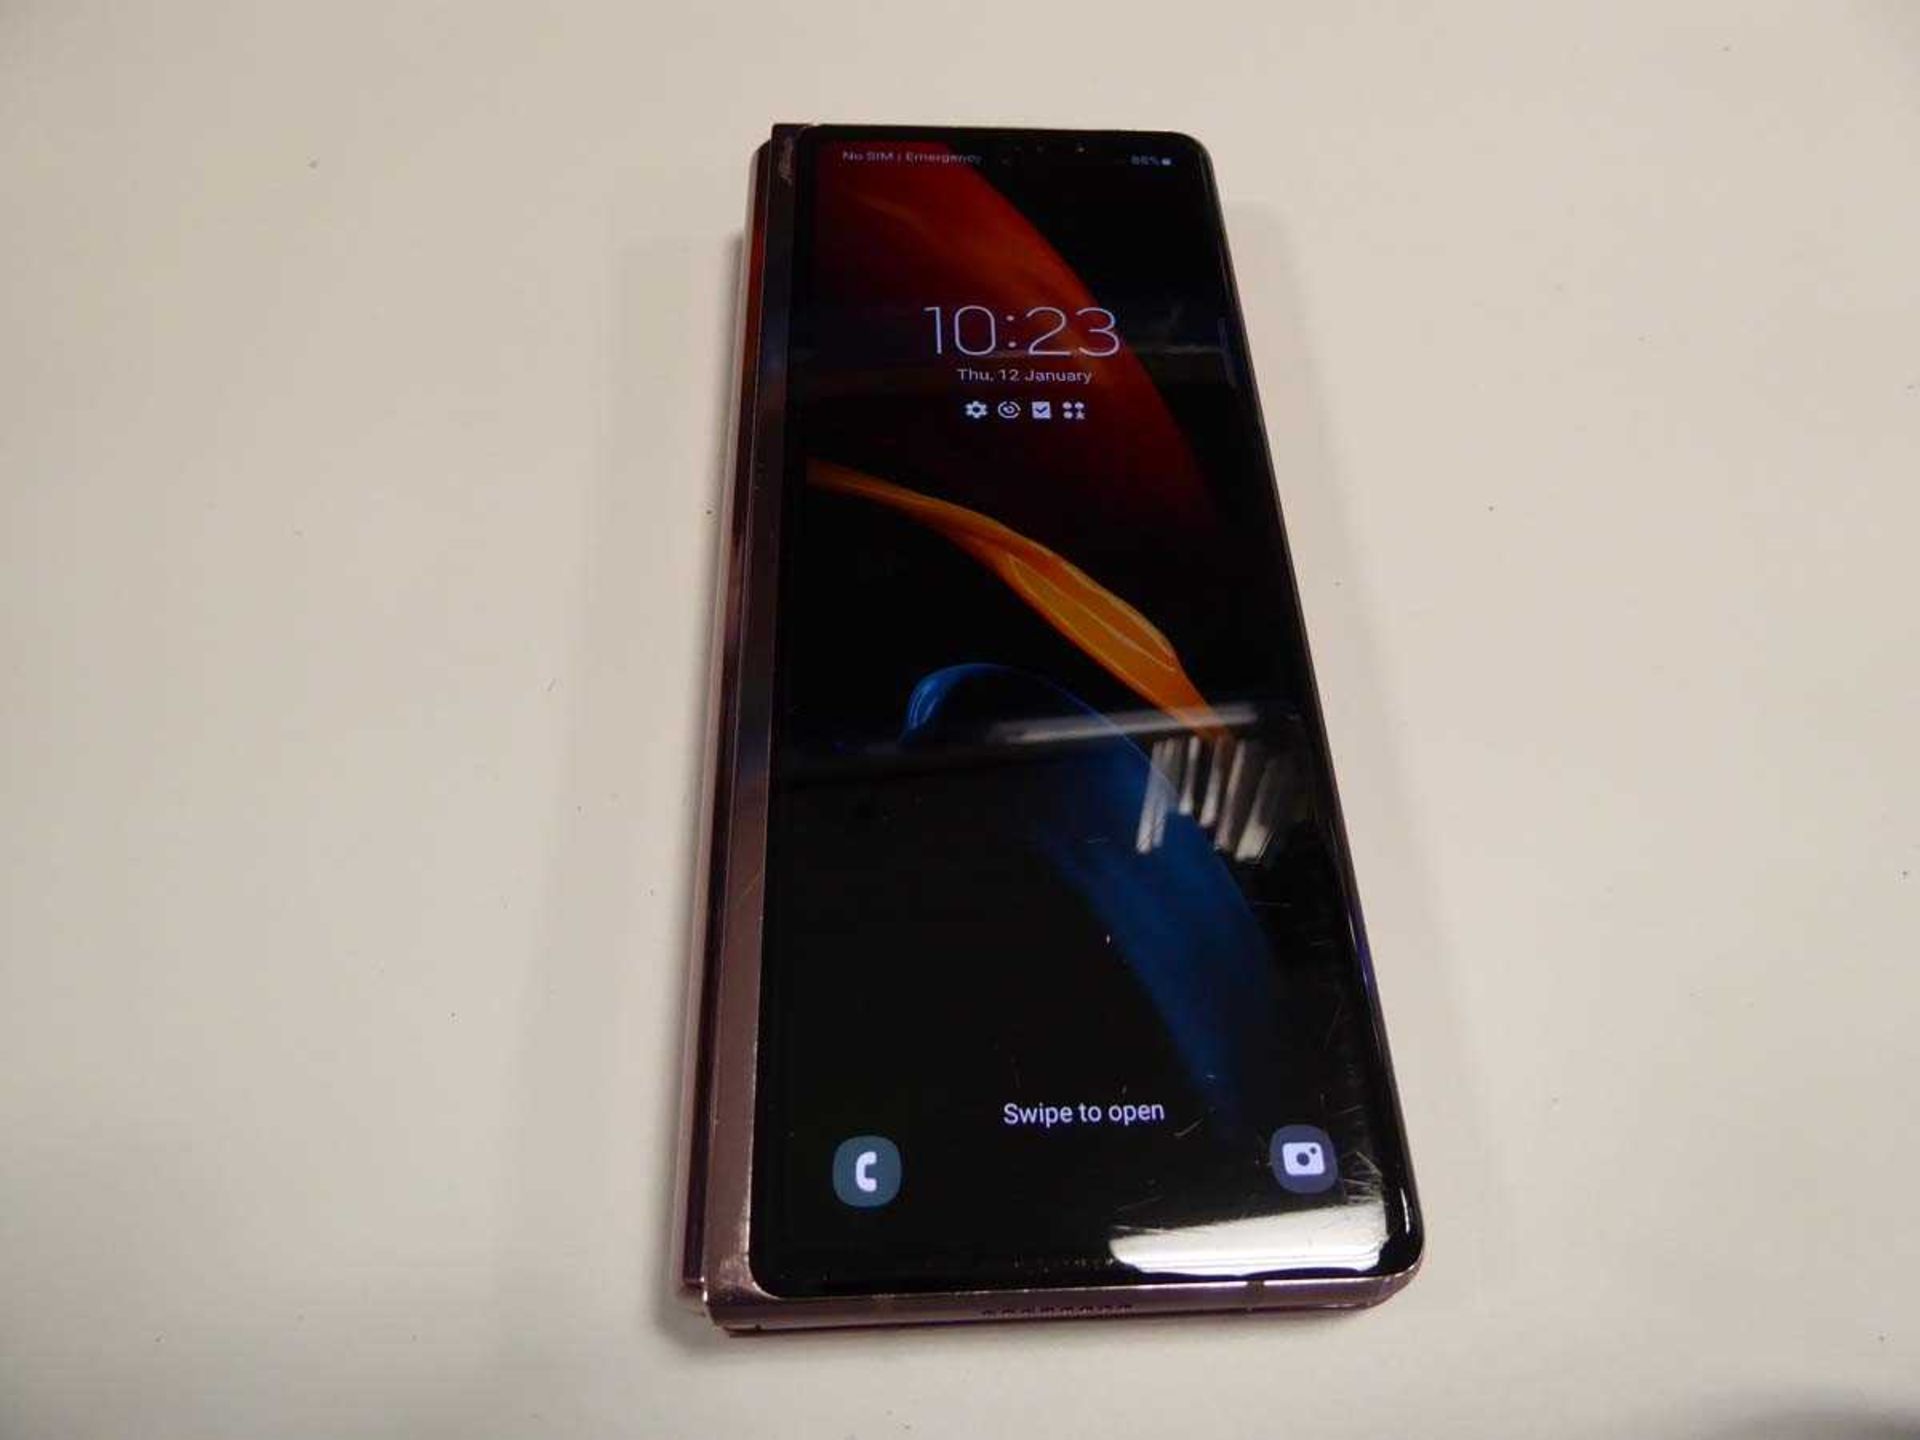 Samsung Galaxy Z Fold 2 5G mobile phone - Image 2 of 3